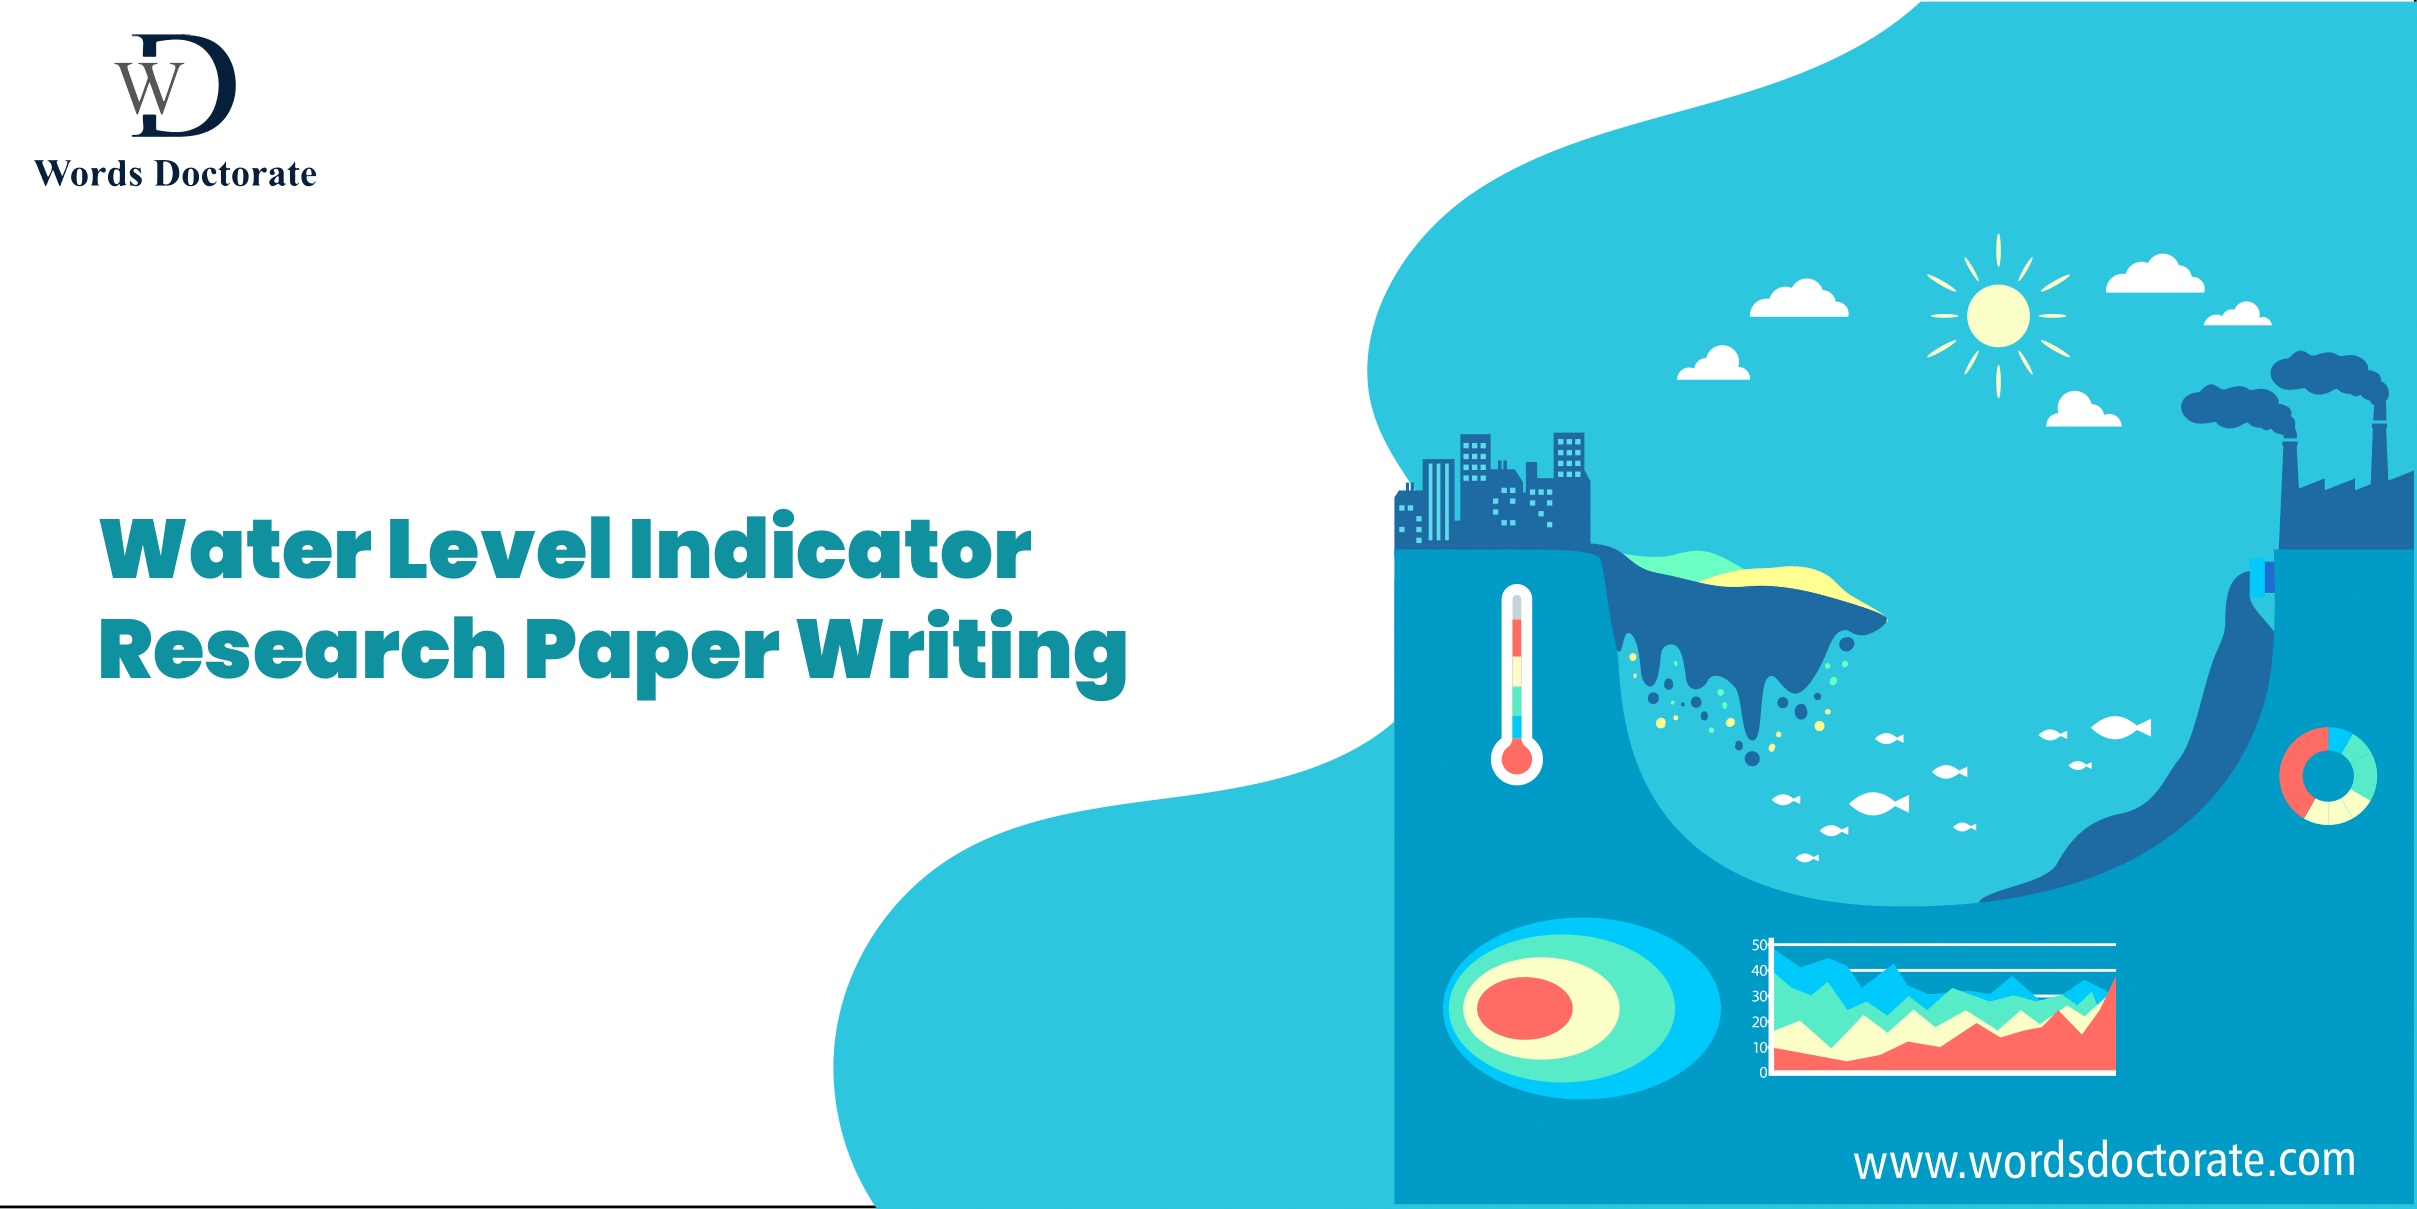 Water Level Indicator Research Paper Writing